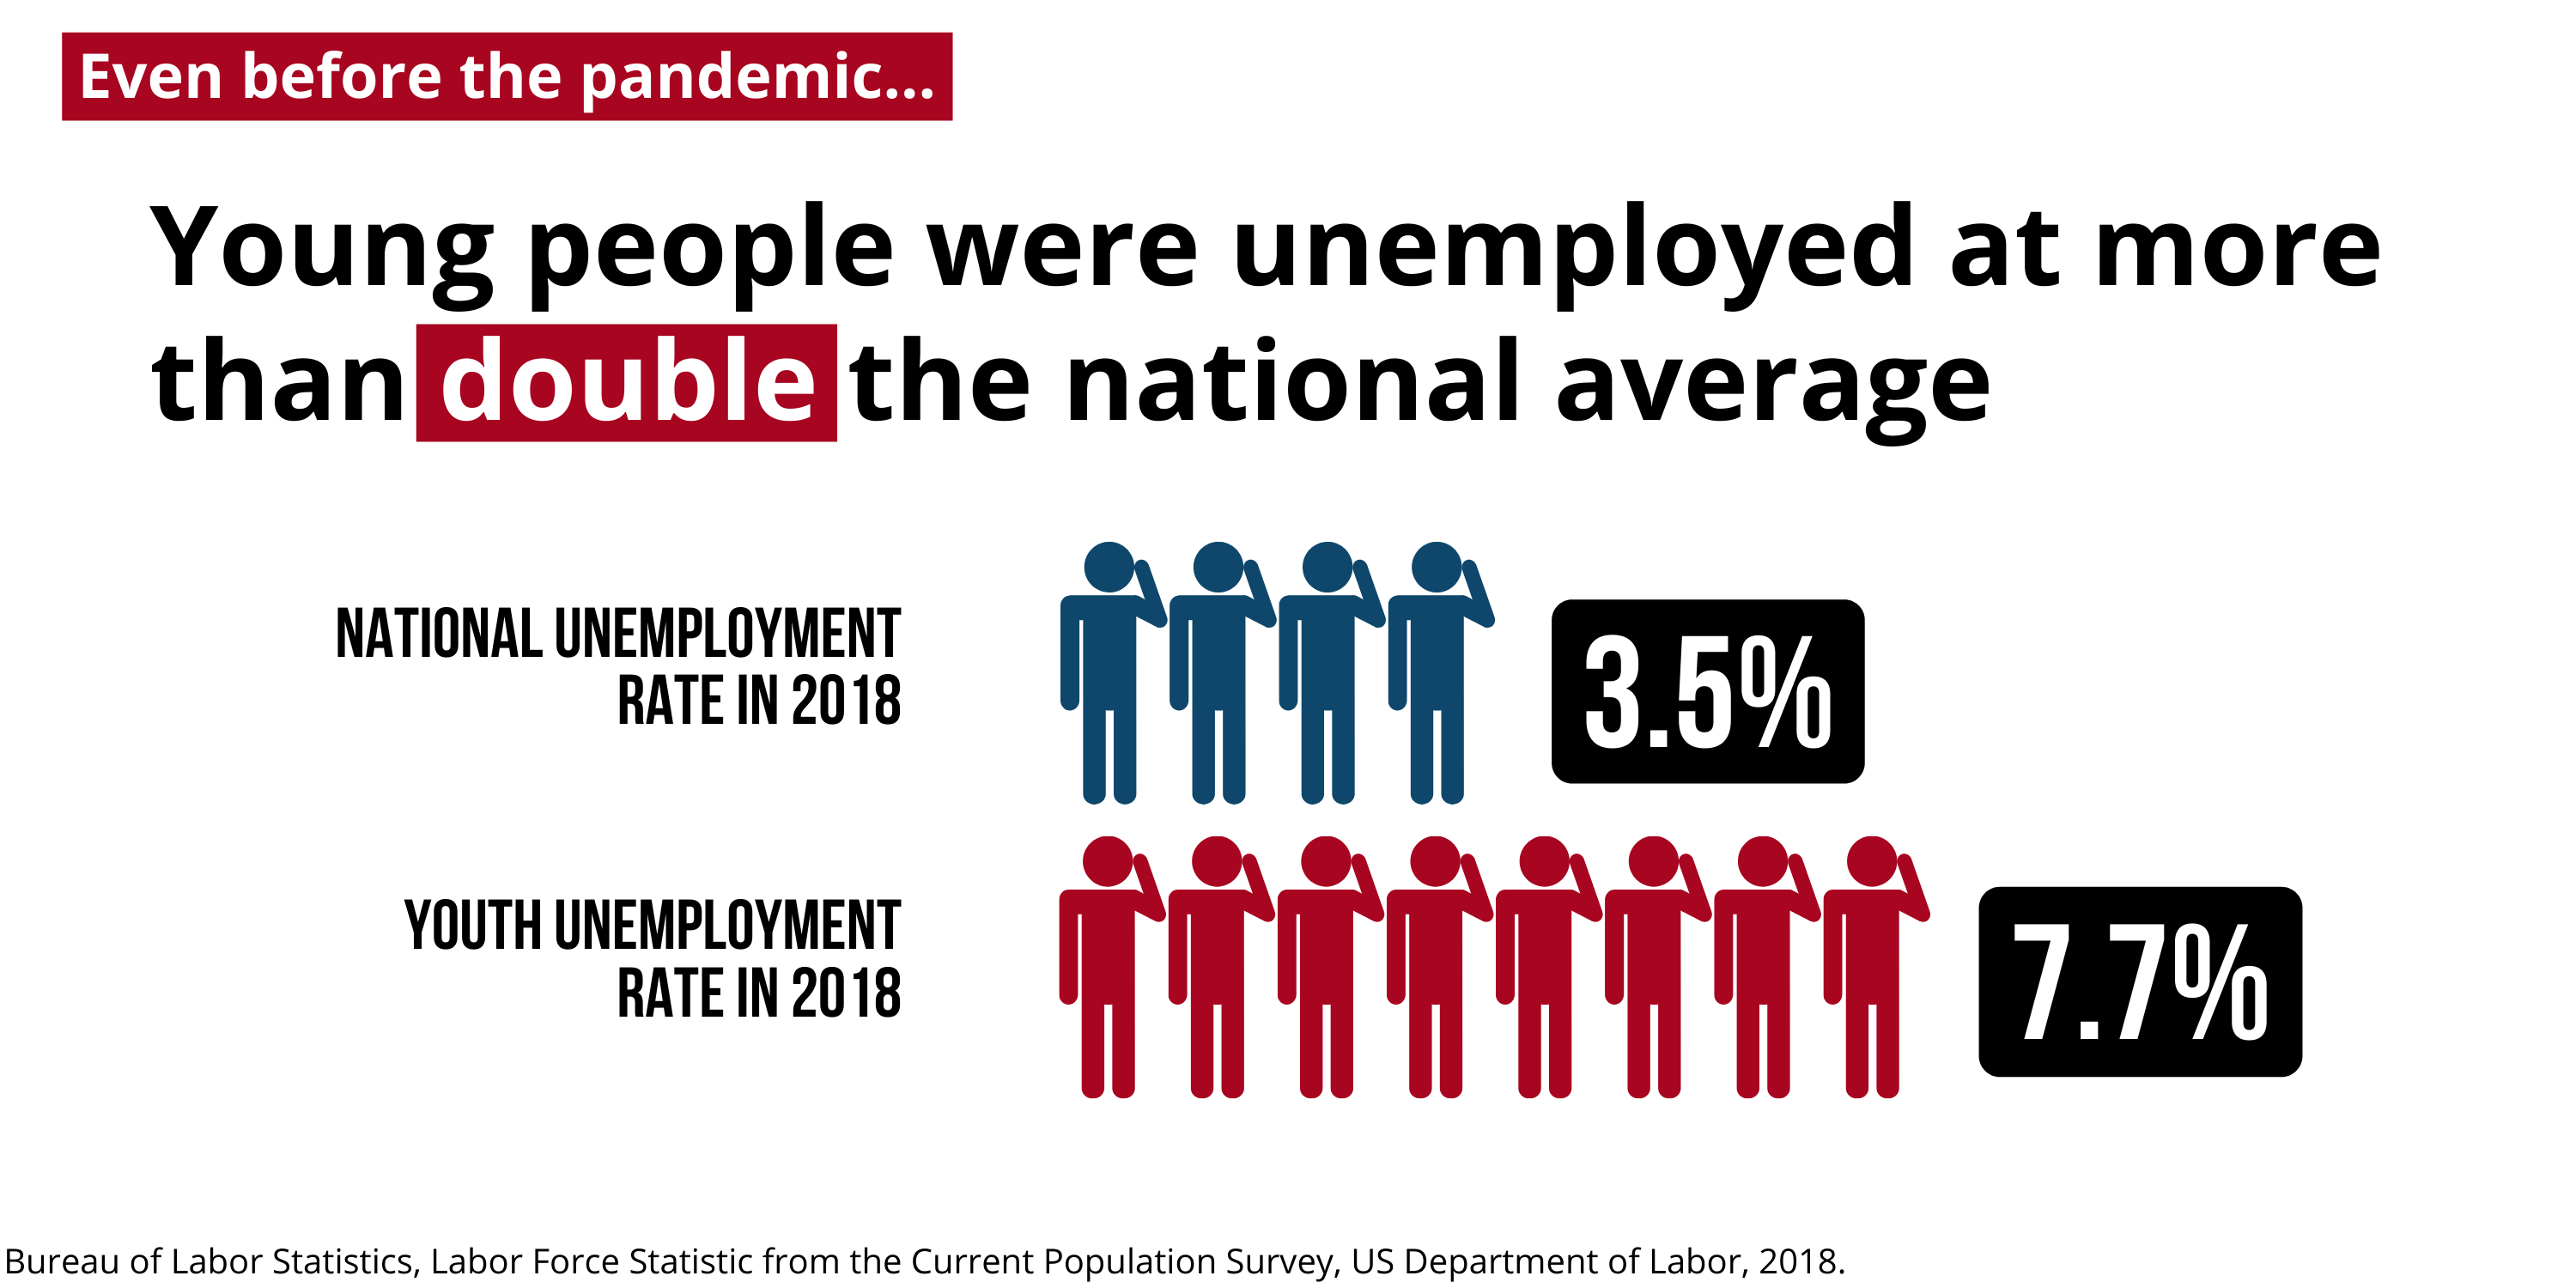 Young people were unemployed at more than double the national average